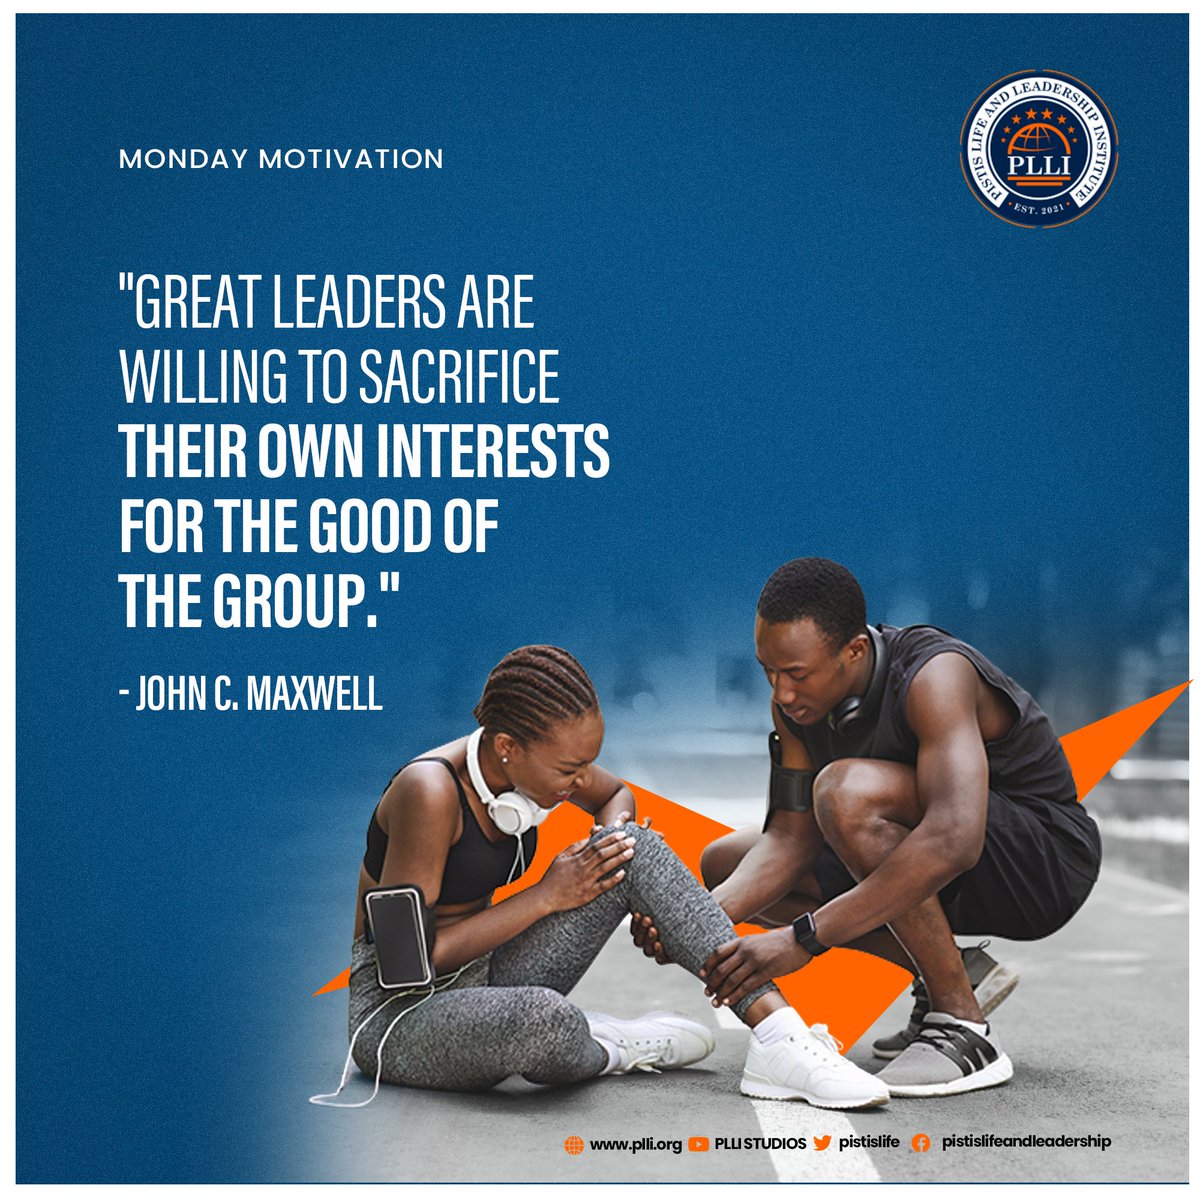 Monday is here again. As a leader, start this week with the realization that the welfare of the group you lead is more important than your interests.
Happy new week.
#mondayishere #selflessleader #haveagreatweekahead #PistisLifeandLeadershipInstitutel